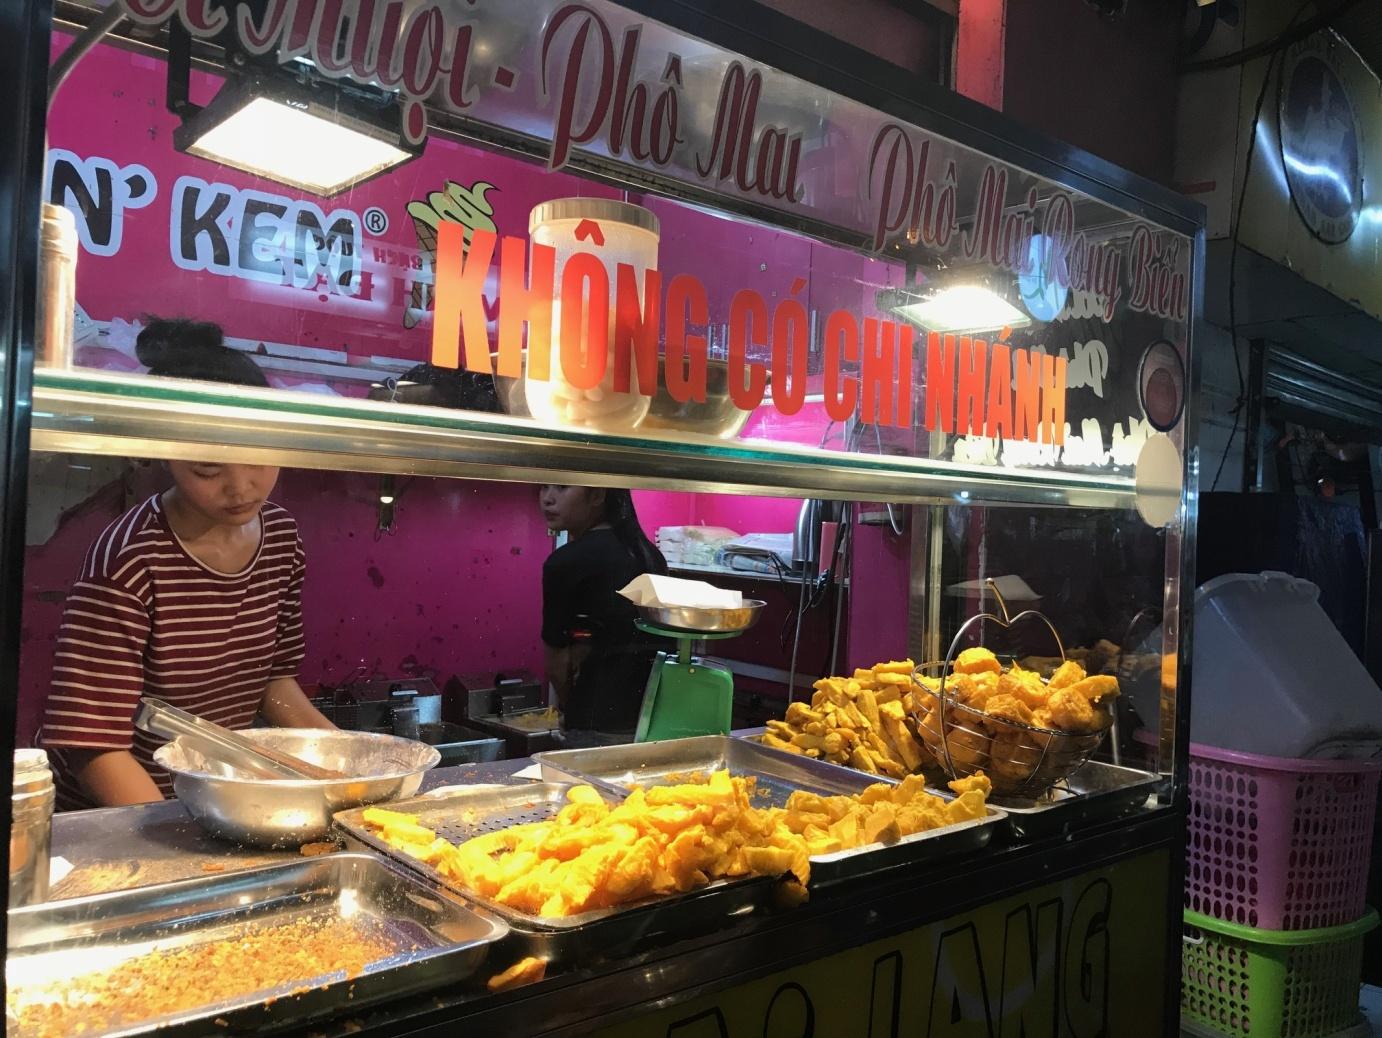 The food stall Khoai Lang Lac Xi Muoi offers delicious wedges of deep fried yam. Photo: Johannes Christian Karl Thiele